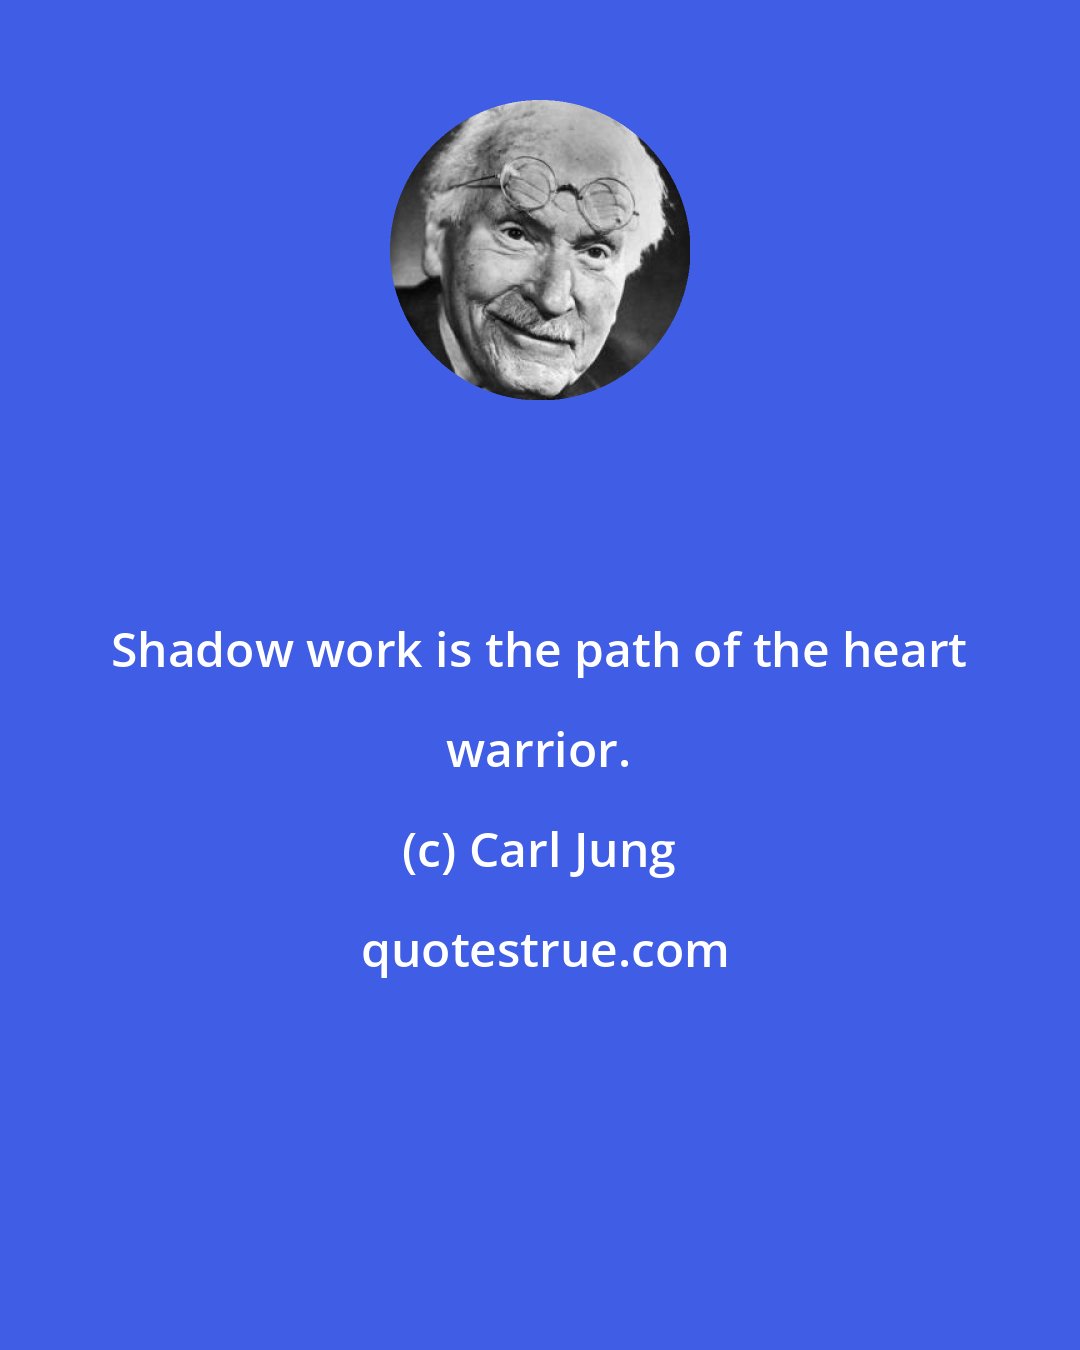 Carl Jung: Shadow work is the path of the heart warrior.